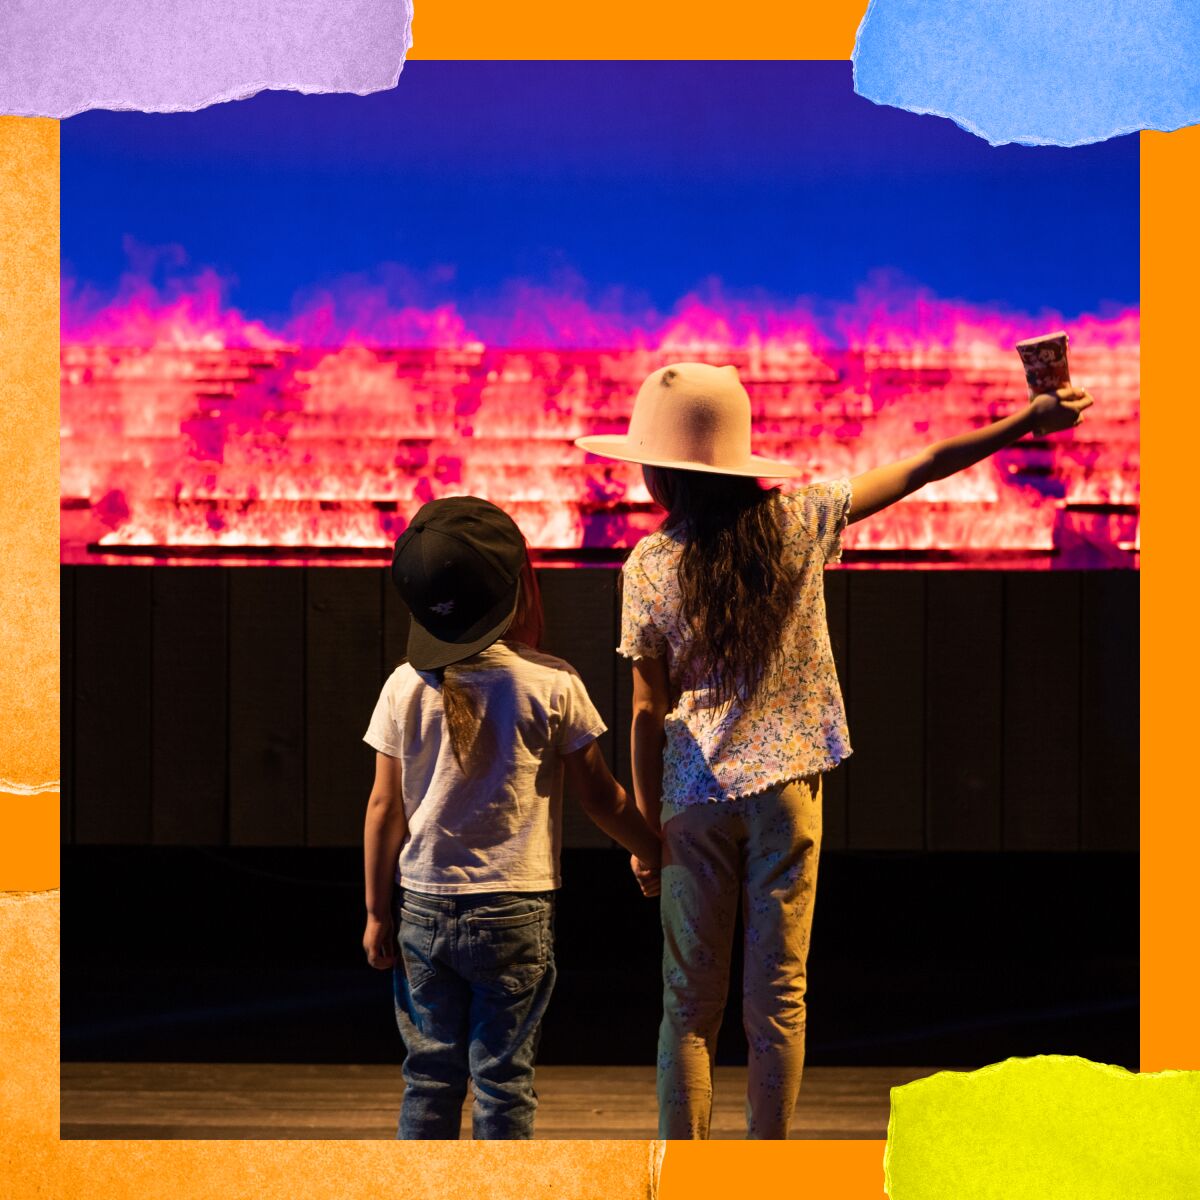 Two children wearing hats stand holding hands in front of a glowing landscape.